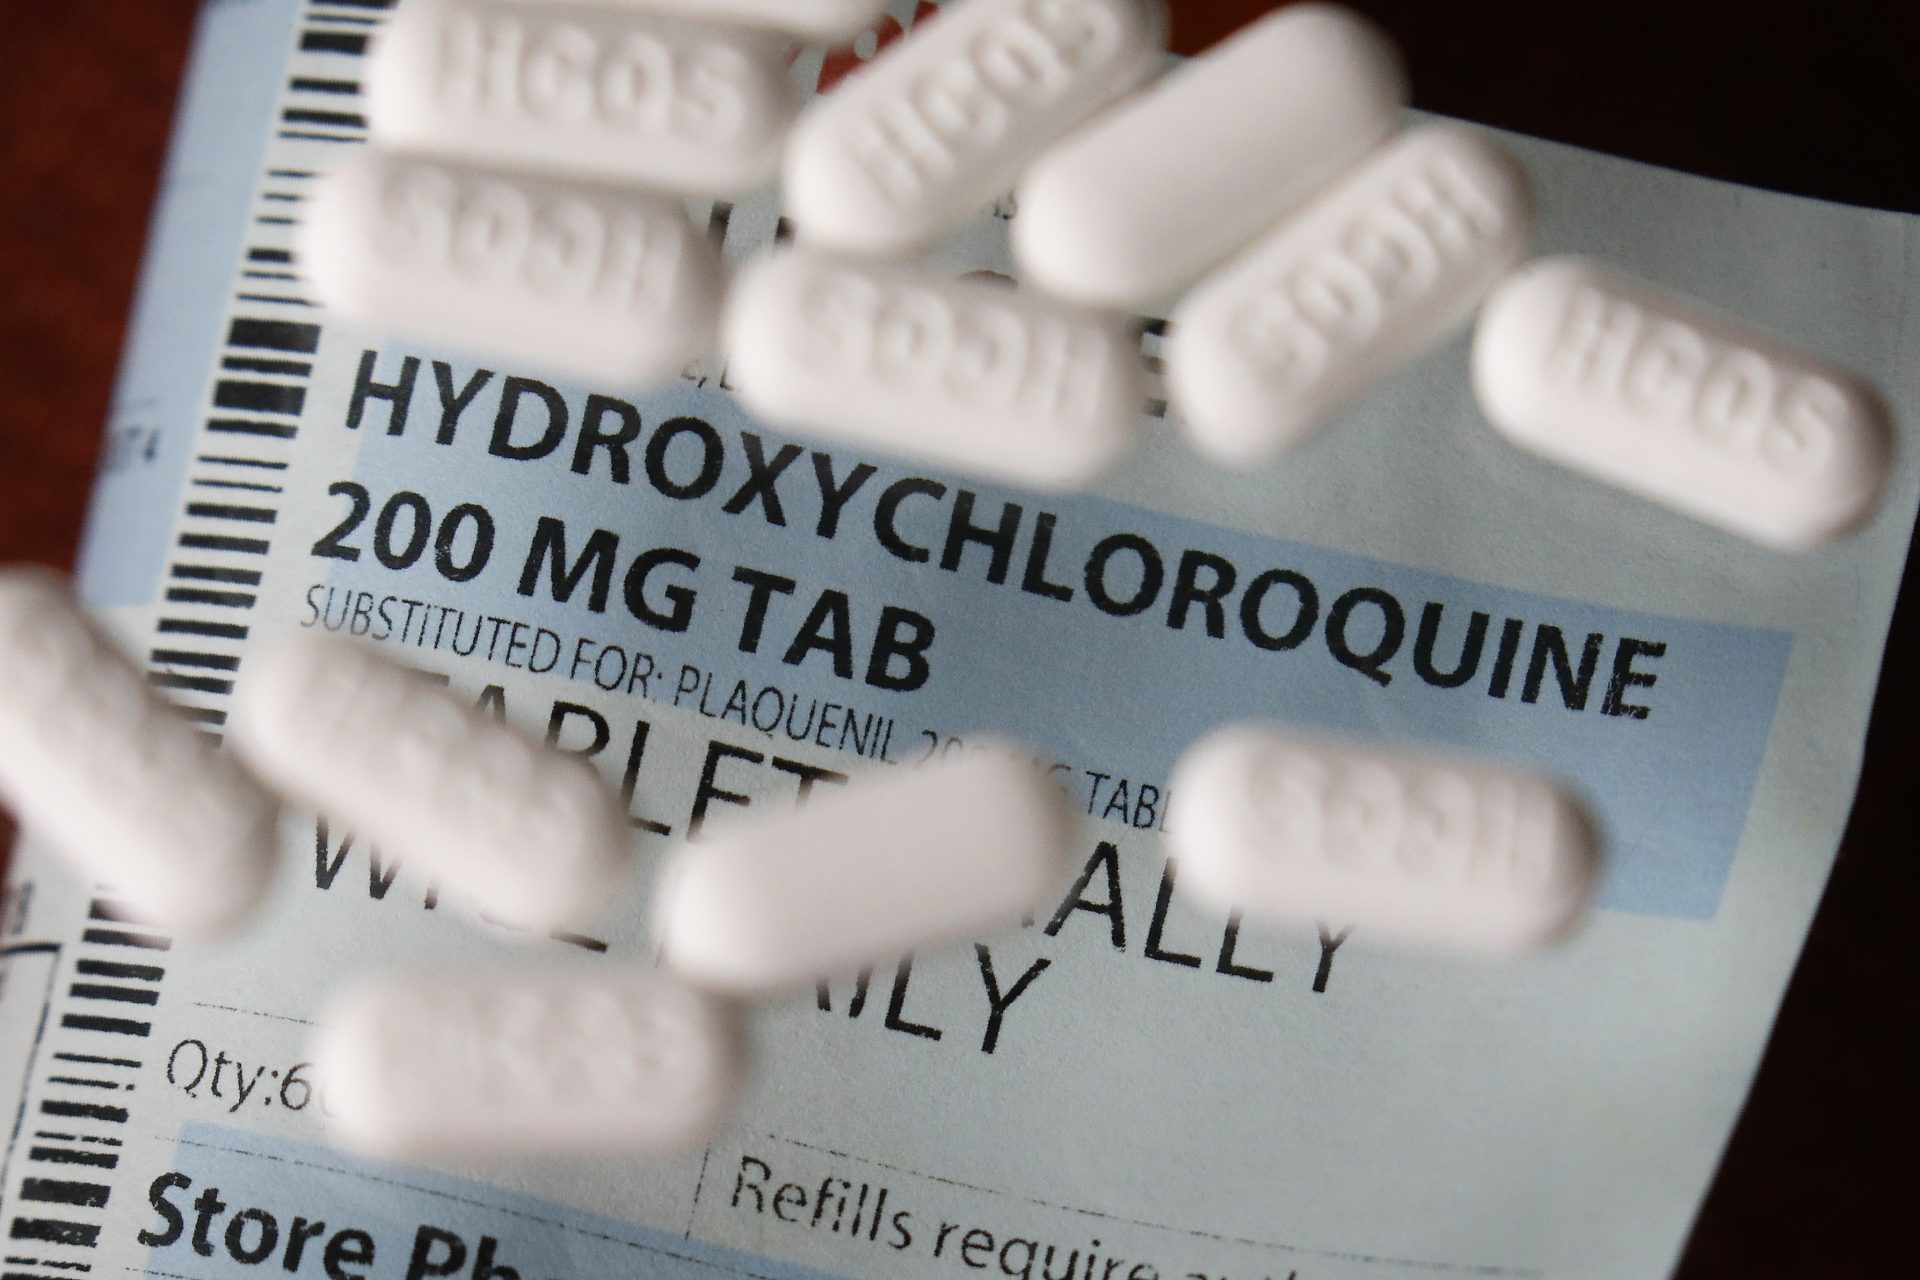 This Monday, April 6, 2020, file photo shows an arrangement of Hydroxychloroquine pills in Las Vegas. At least 13 states have obtained a total of more than 10 million doses of malaria drugs to treat COVID-19 patients despite warnings from doctors that more tests are needed before the medications that President Trump once fiercely promoted should be used to help people with the coronavirus.